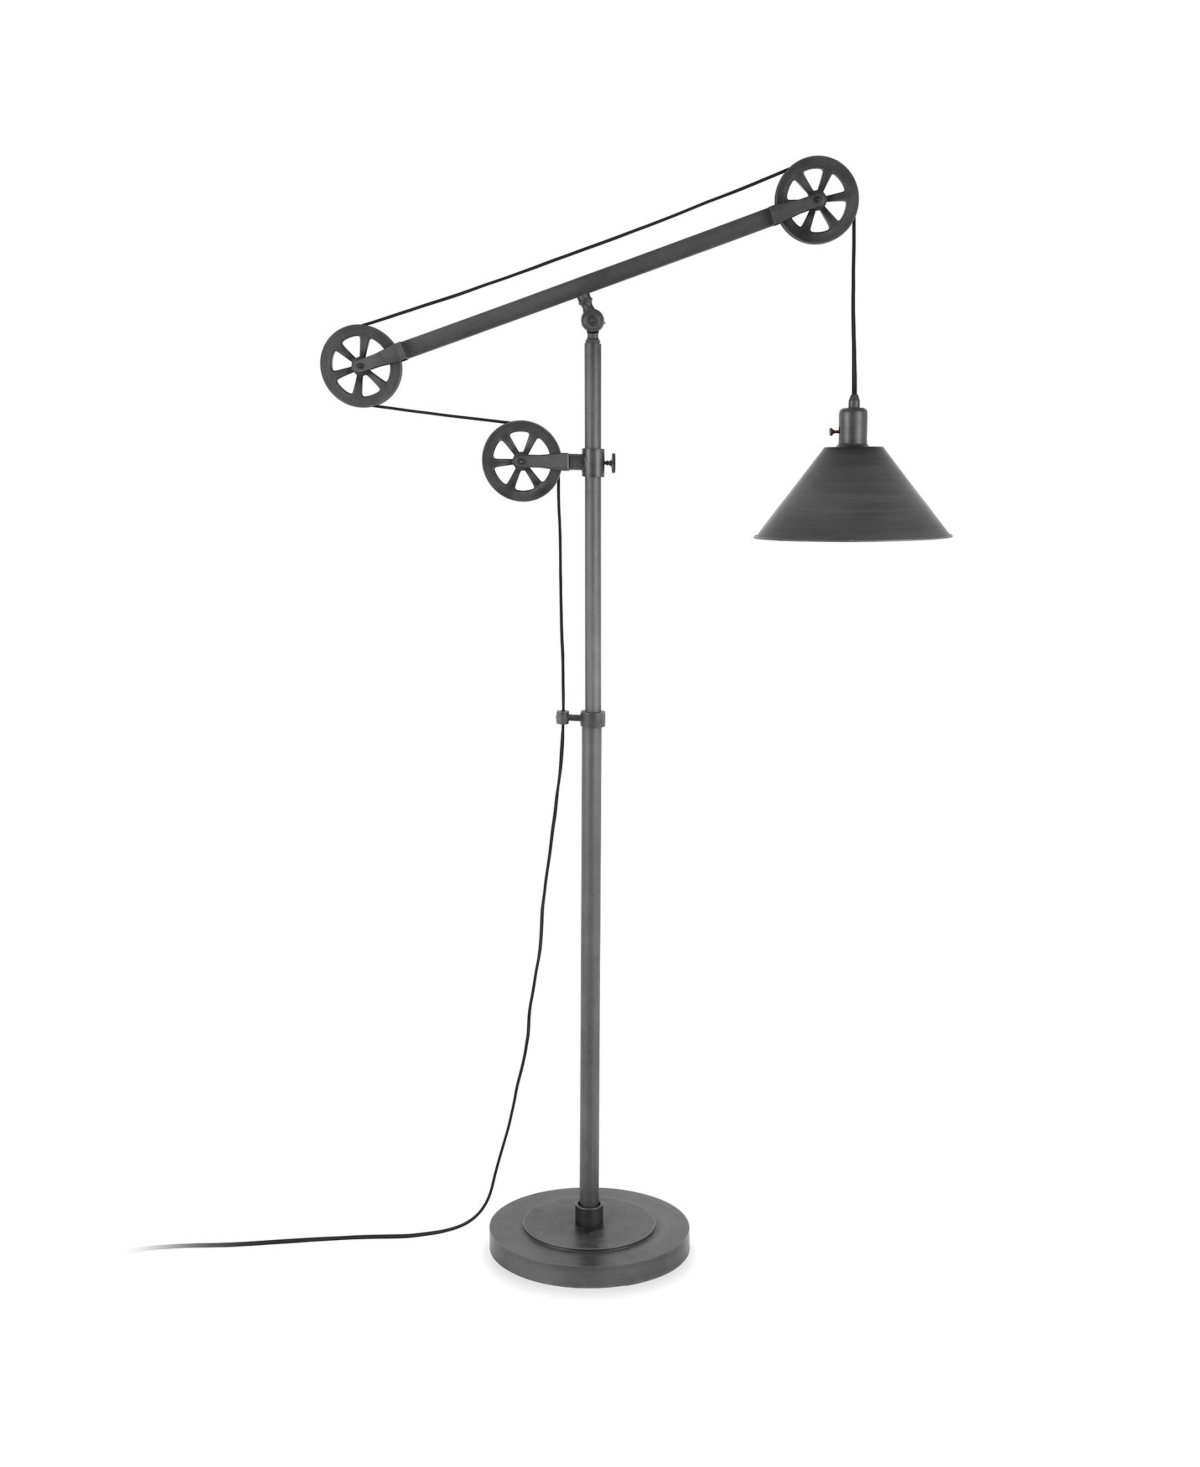 Hudson & Canal Descartes 70" Metal Shade Pulley System Floor Lamp In Aged Steel